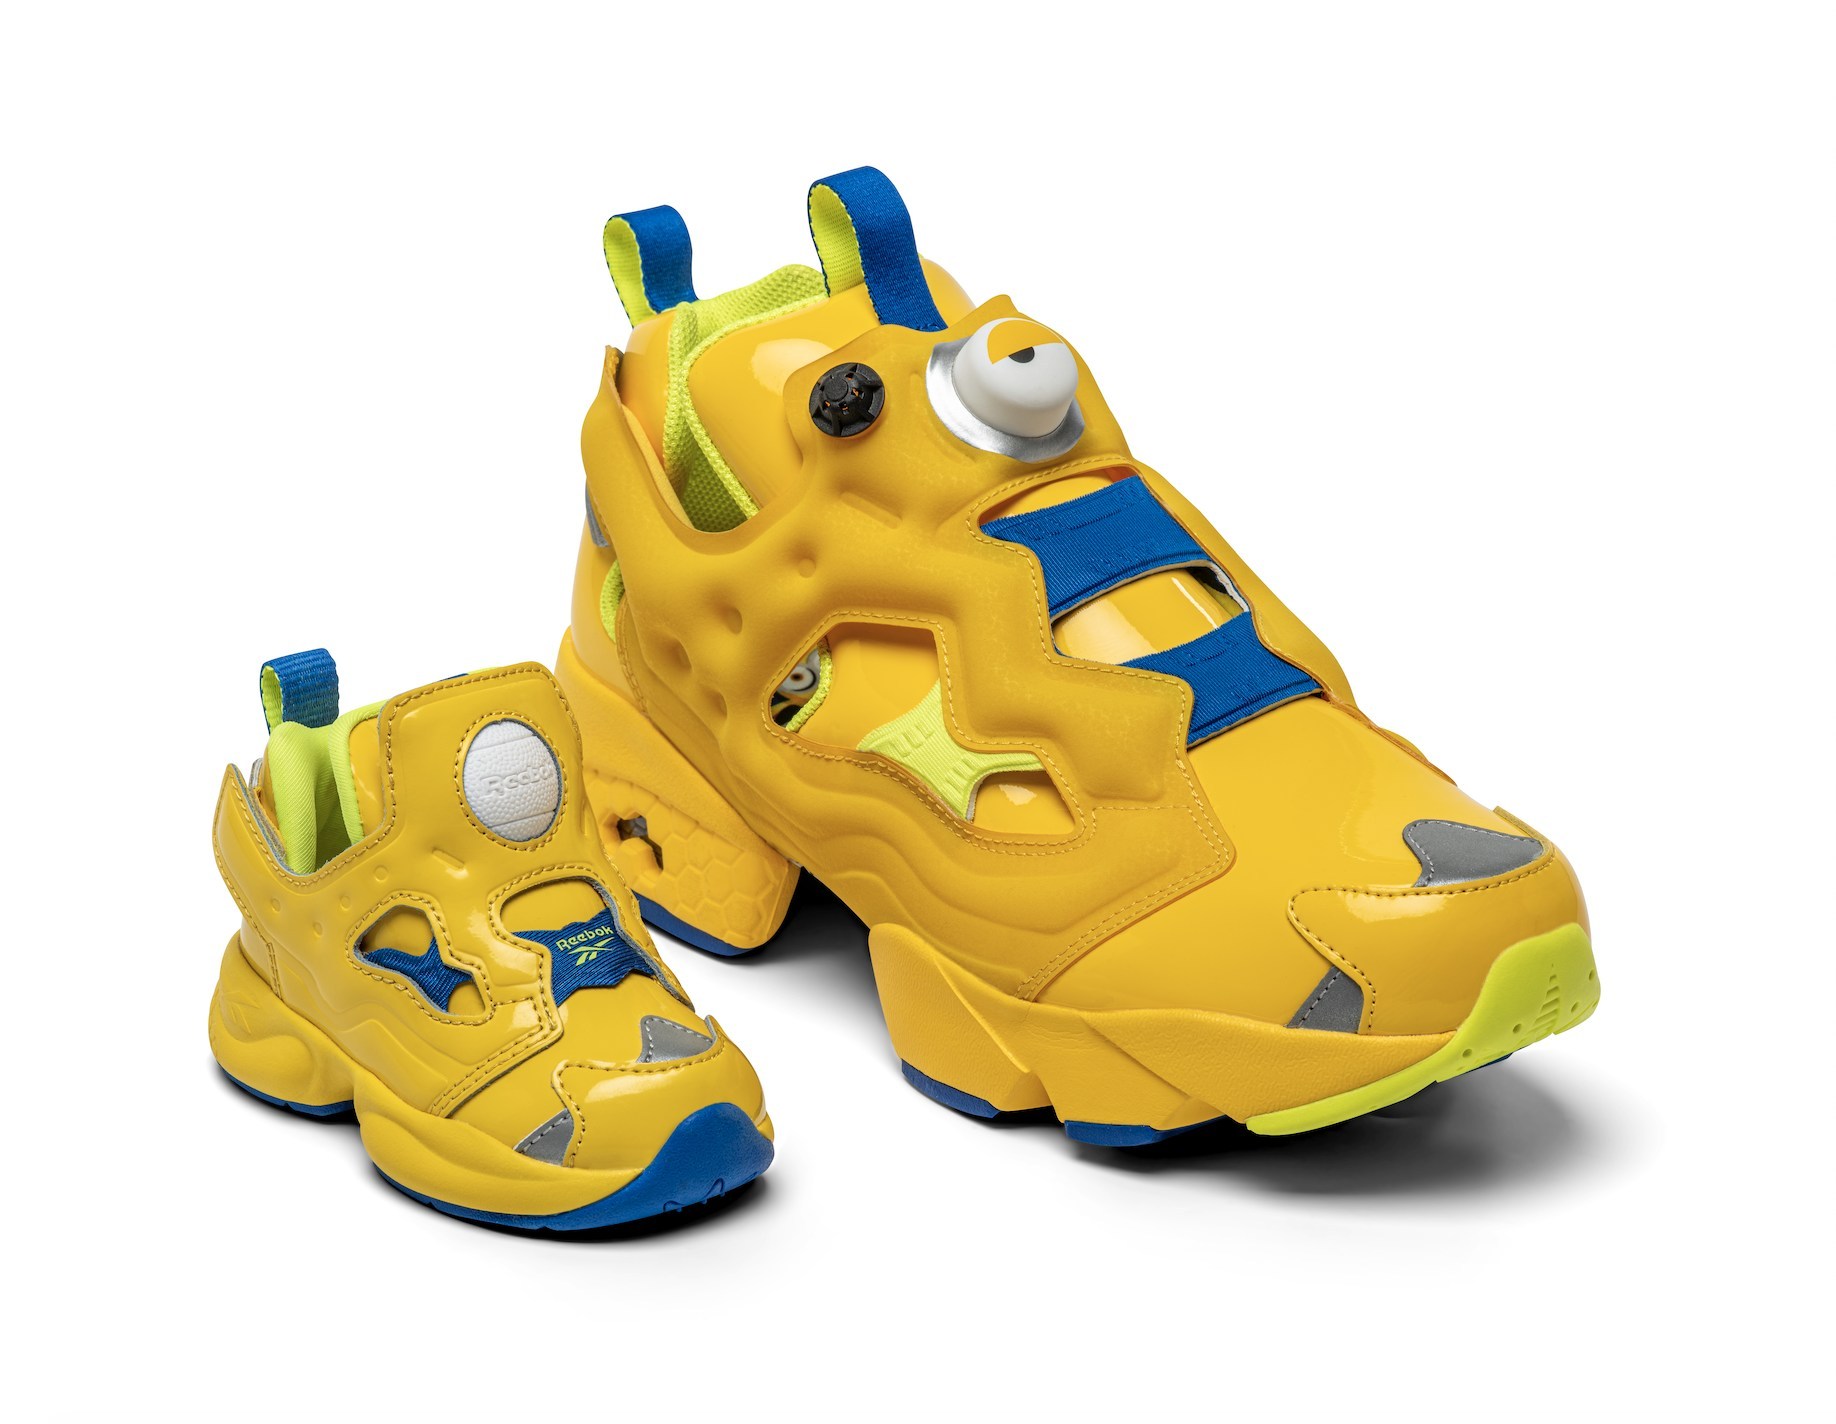 Minions x Reebok Question Mid Gru - available globally October 1, 2020.